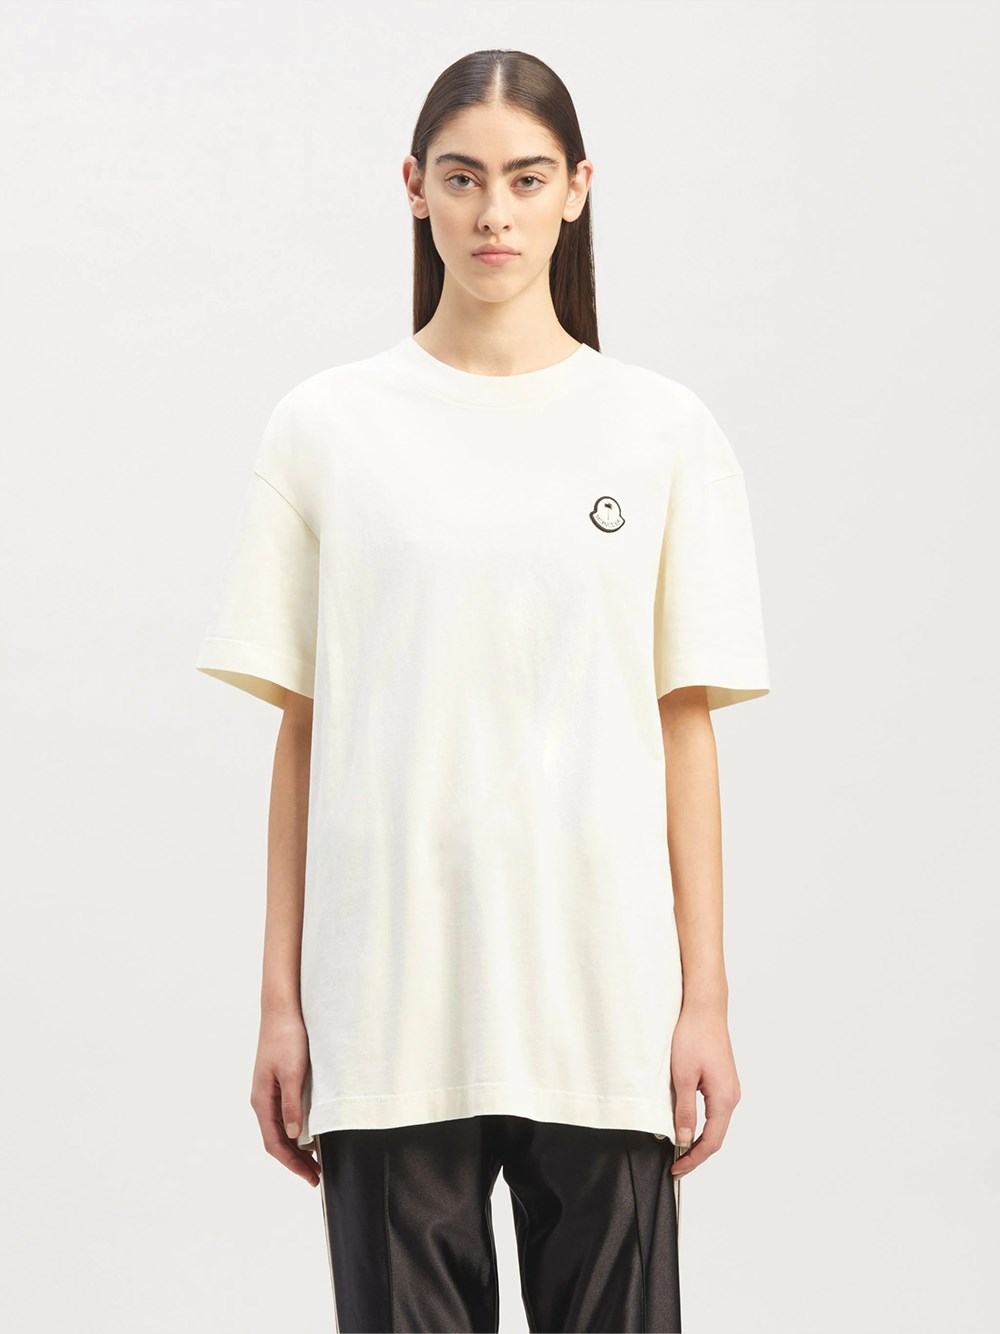 moncler genius 8 MONCLER PALM ANGELS: T-SHIRT available on ...